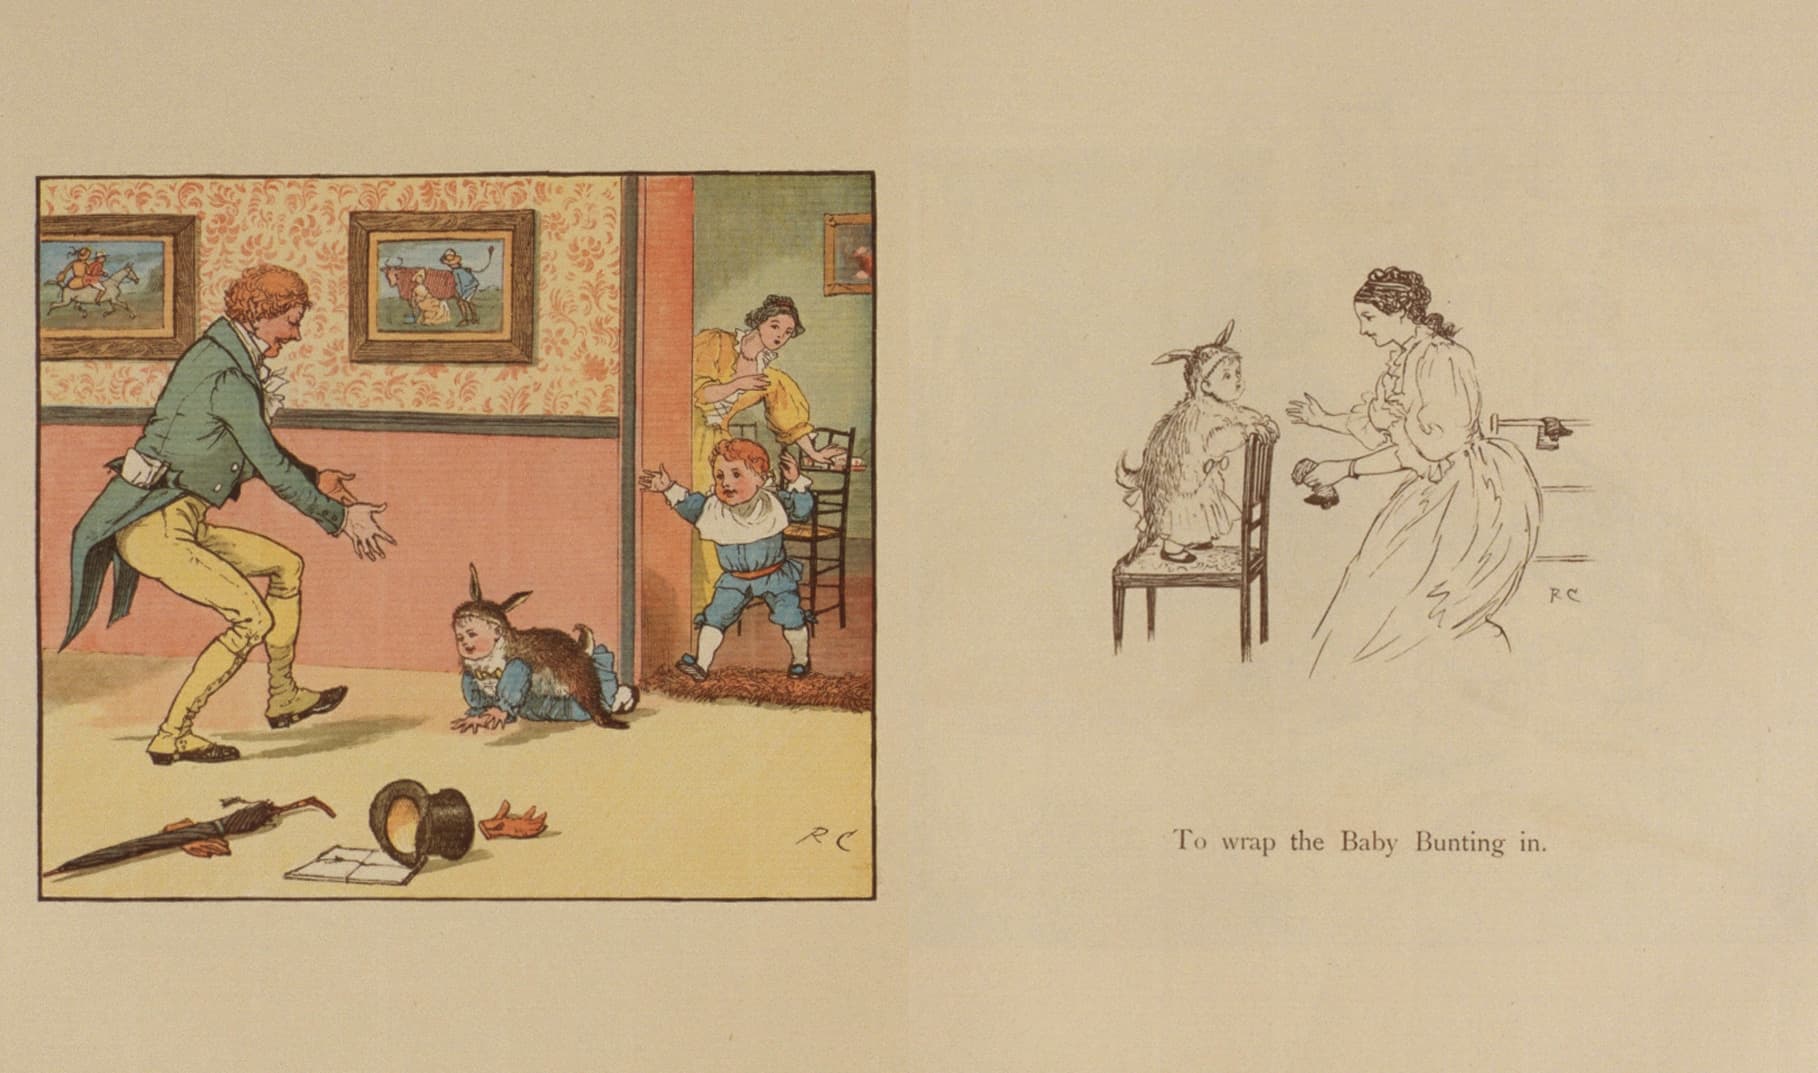 page 22-23 of Hey diddle diddle and Baby Bunting (page 340-341 of The Complete Collection of PICTURES and SONGS)